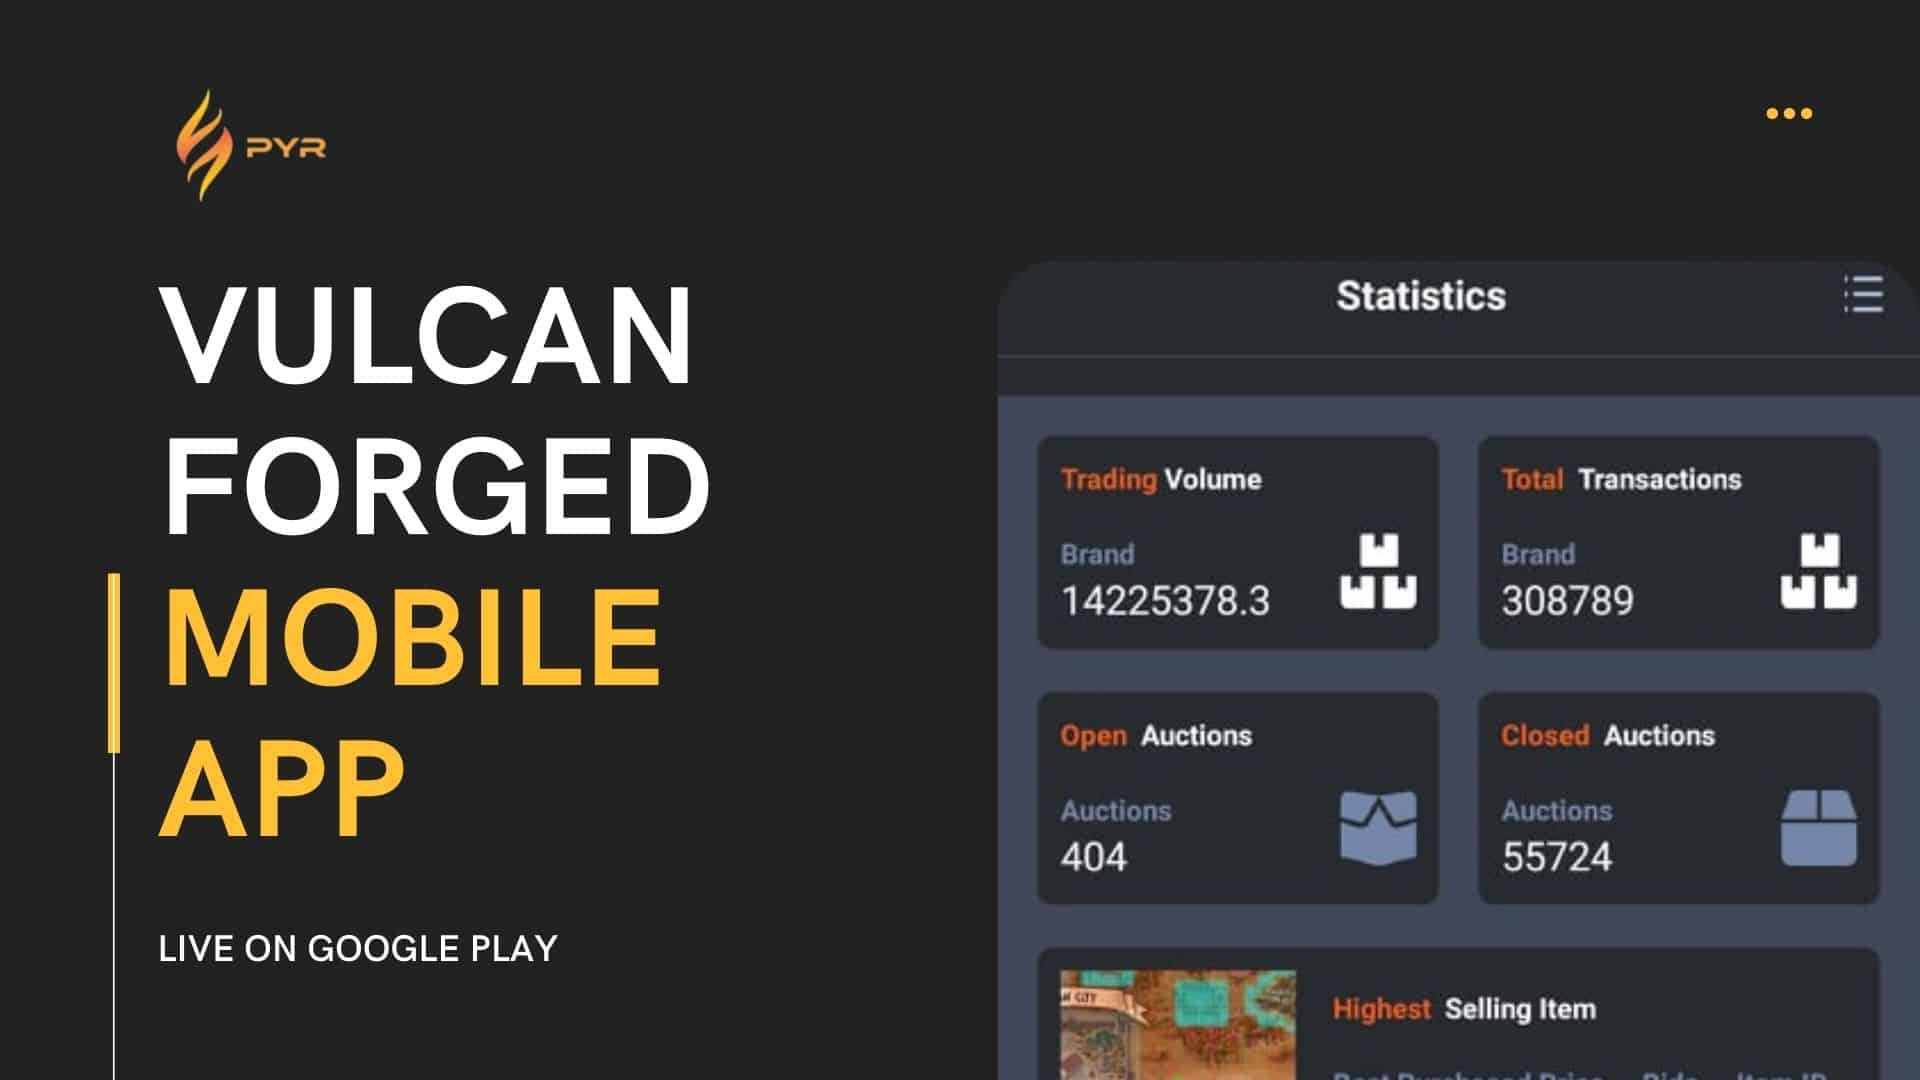 VULCAN FORGED MOBILE APP Following the momentous launch of their VulcanDex, a decentralized exchange for the blockchain gaming industry with cross chain support, the entire ecosystem of Vulcan Forged is thriving. The community is growing and getting stronger with each passing day thanks to the collective success of their official marketplace and games like VulcanVerse, Berserk, Forge Arena and Vulcan Chess. That is the reason why they have attracted the undying support of their daily users across different games as well as gained the trust of their partners like Yield Guild Games who have invested on Vulcan Verse land plots and offered scholarships to their members through The Cedalion program. 